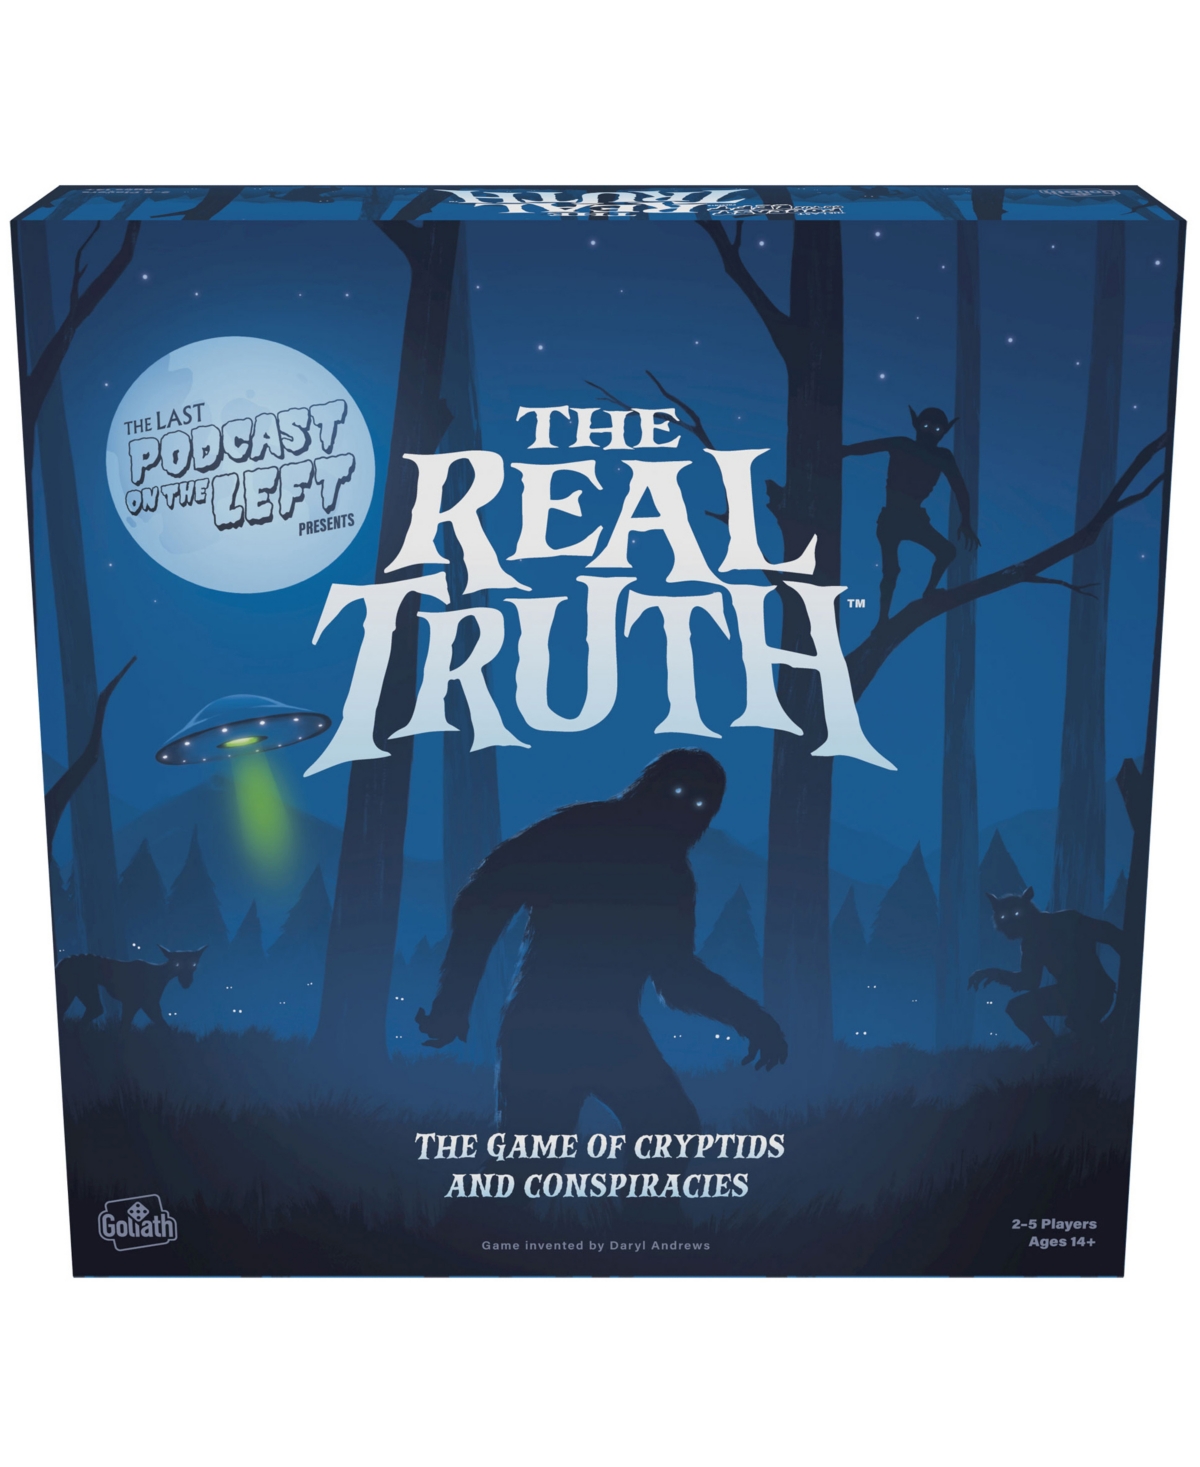 University Games Goliath The Last Podcast On The Left Presents The Real Truth The Strategy Game Of Creatures, Cryptid In No Color